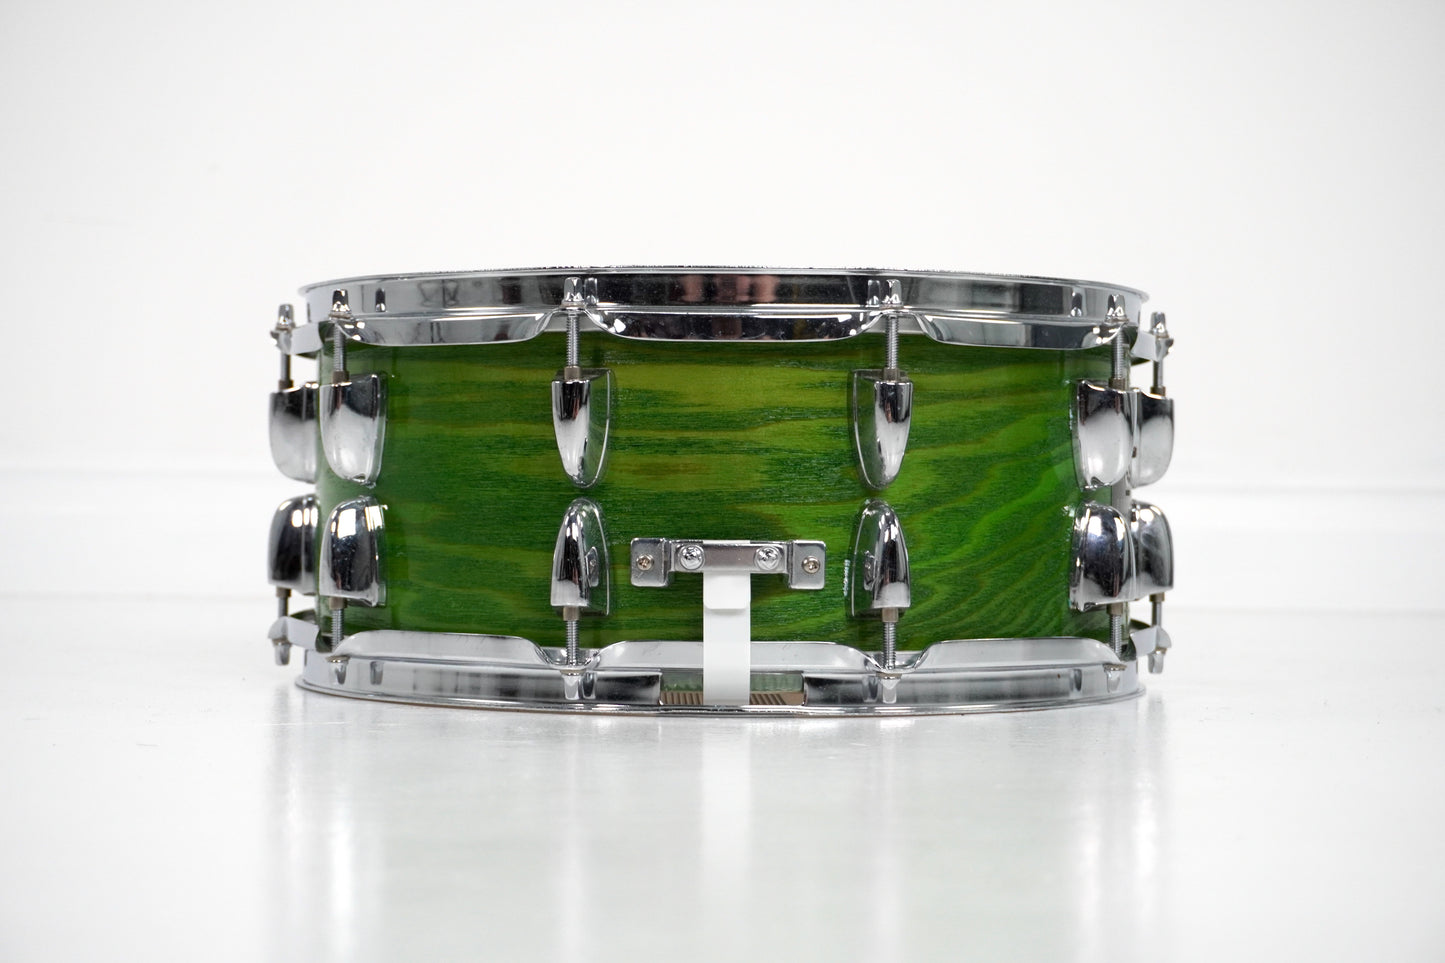 Yamaha 14” x 5.5” Rock Tour Snare Drum in Textured Ash Green